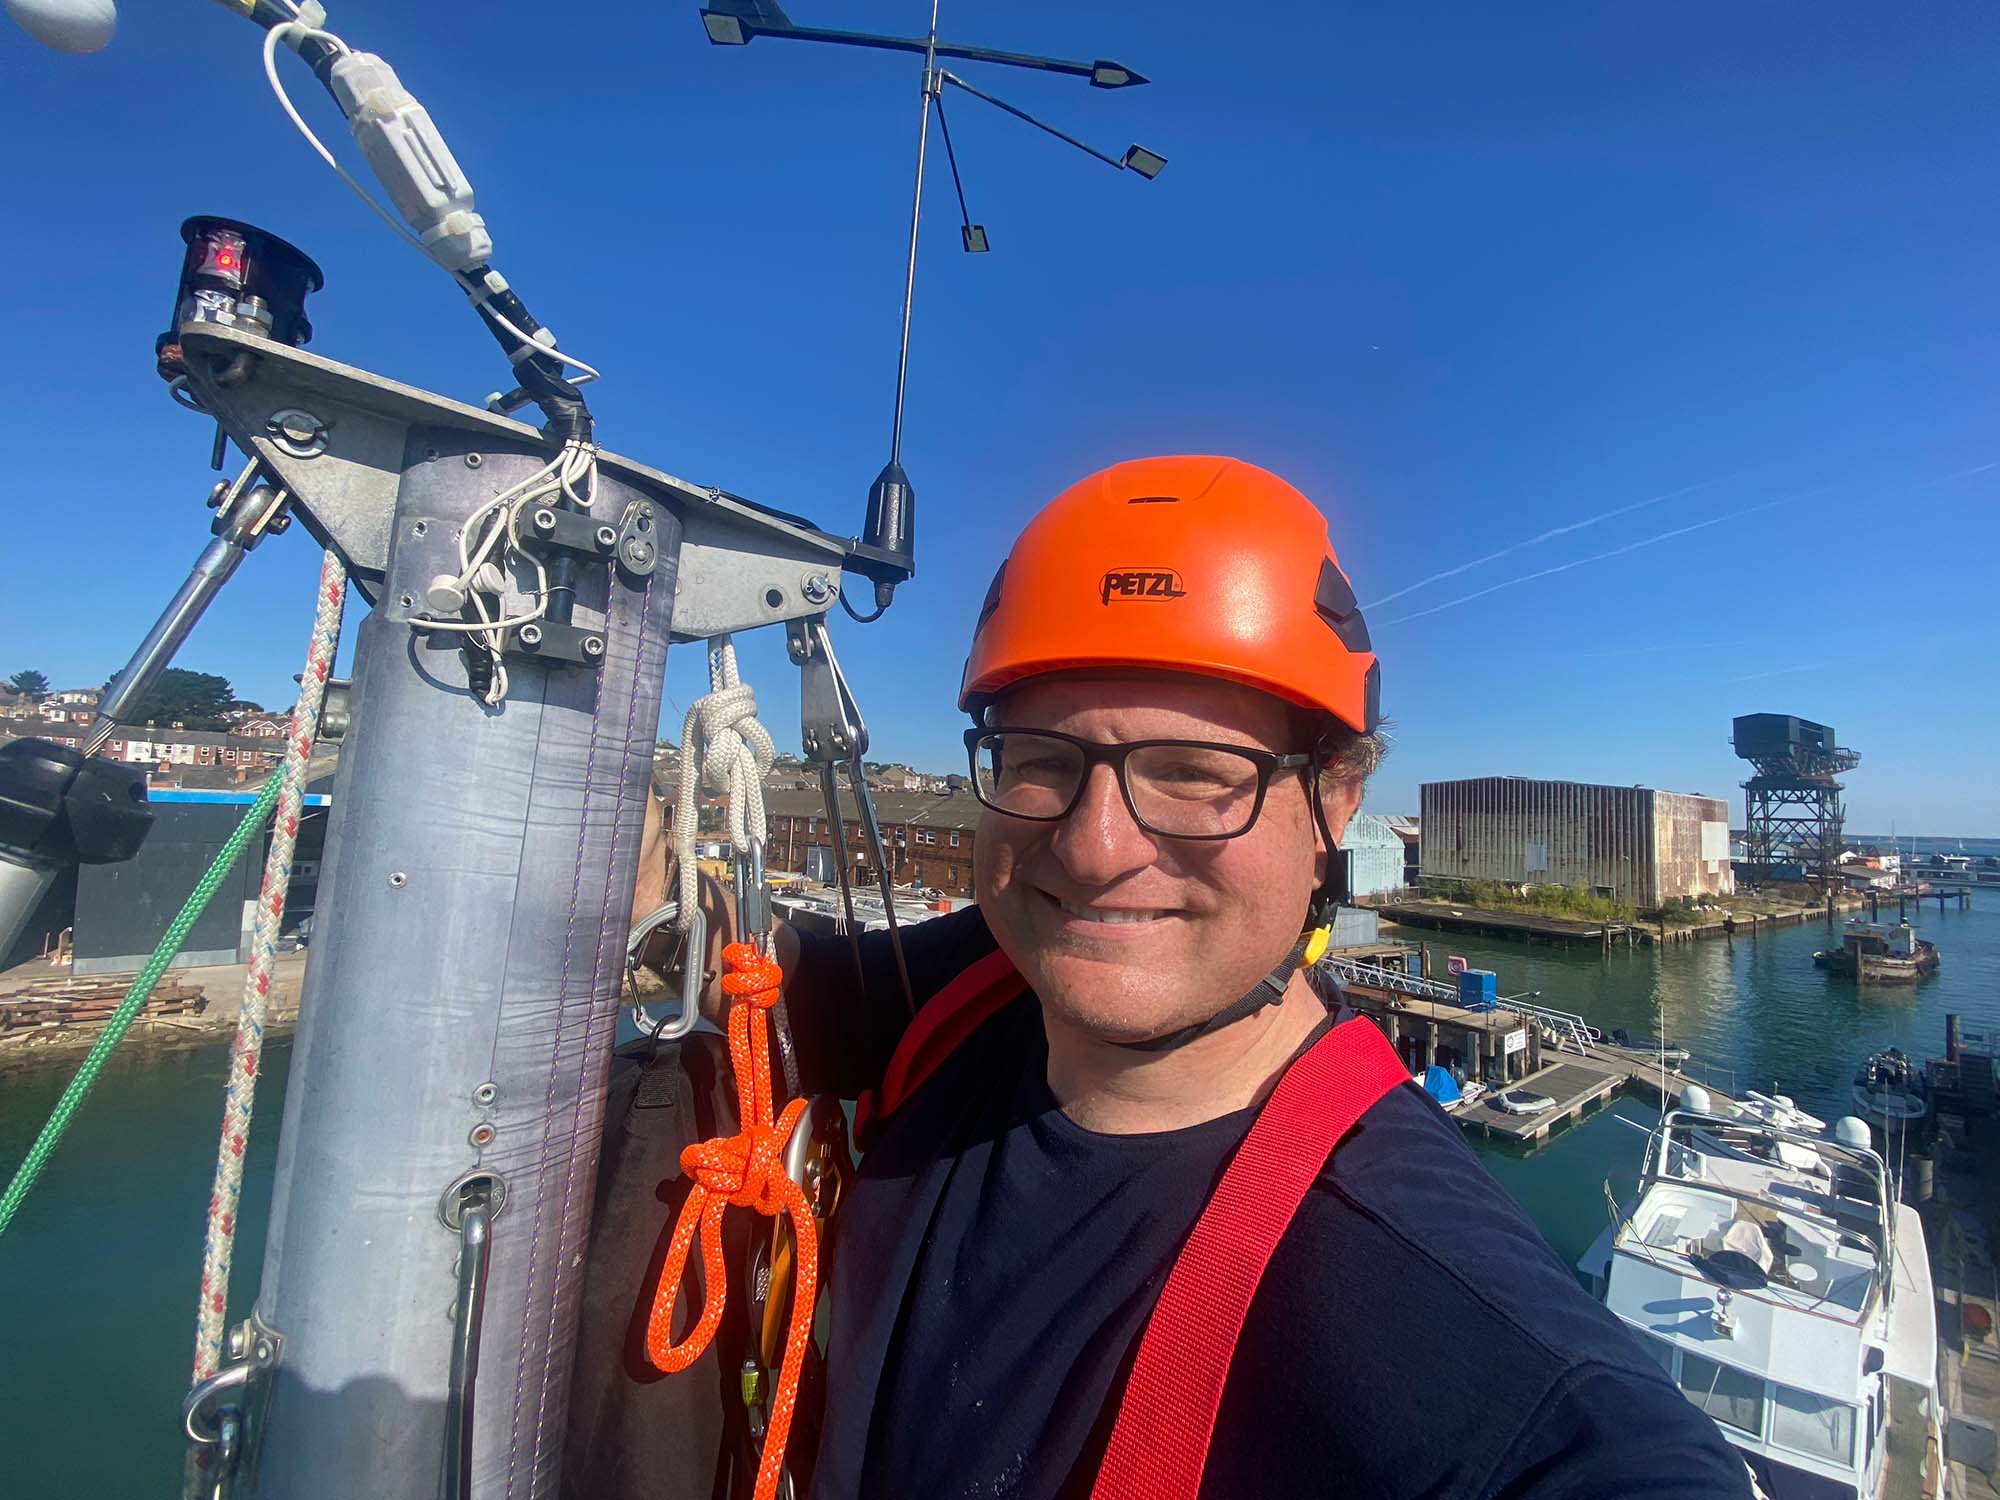 Ian is at the top of Trilleen's mast. He is wearing a orange helmet which stands out against a bright blue sky.